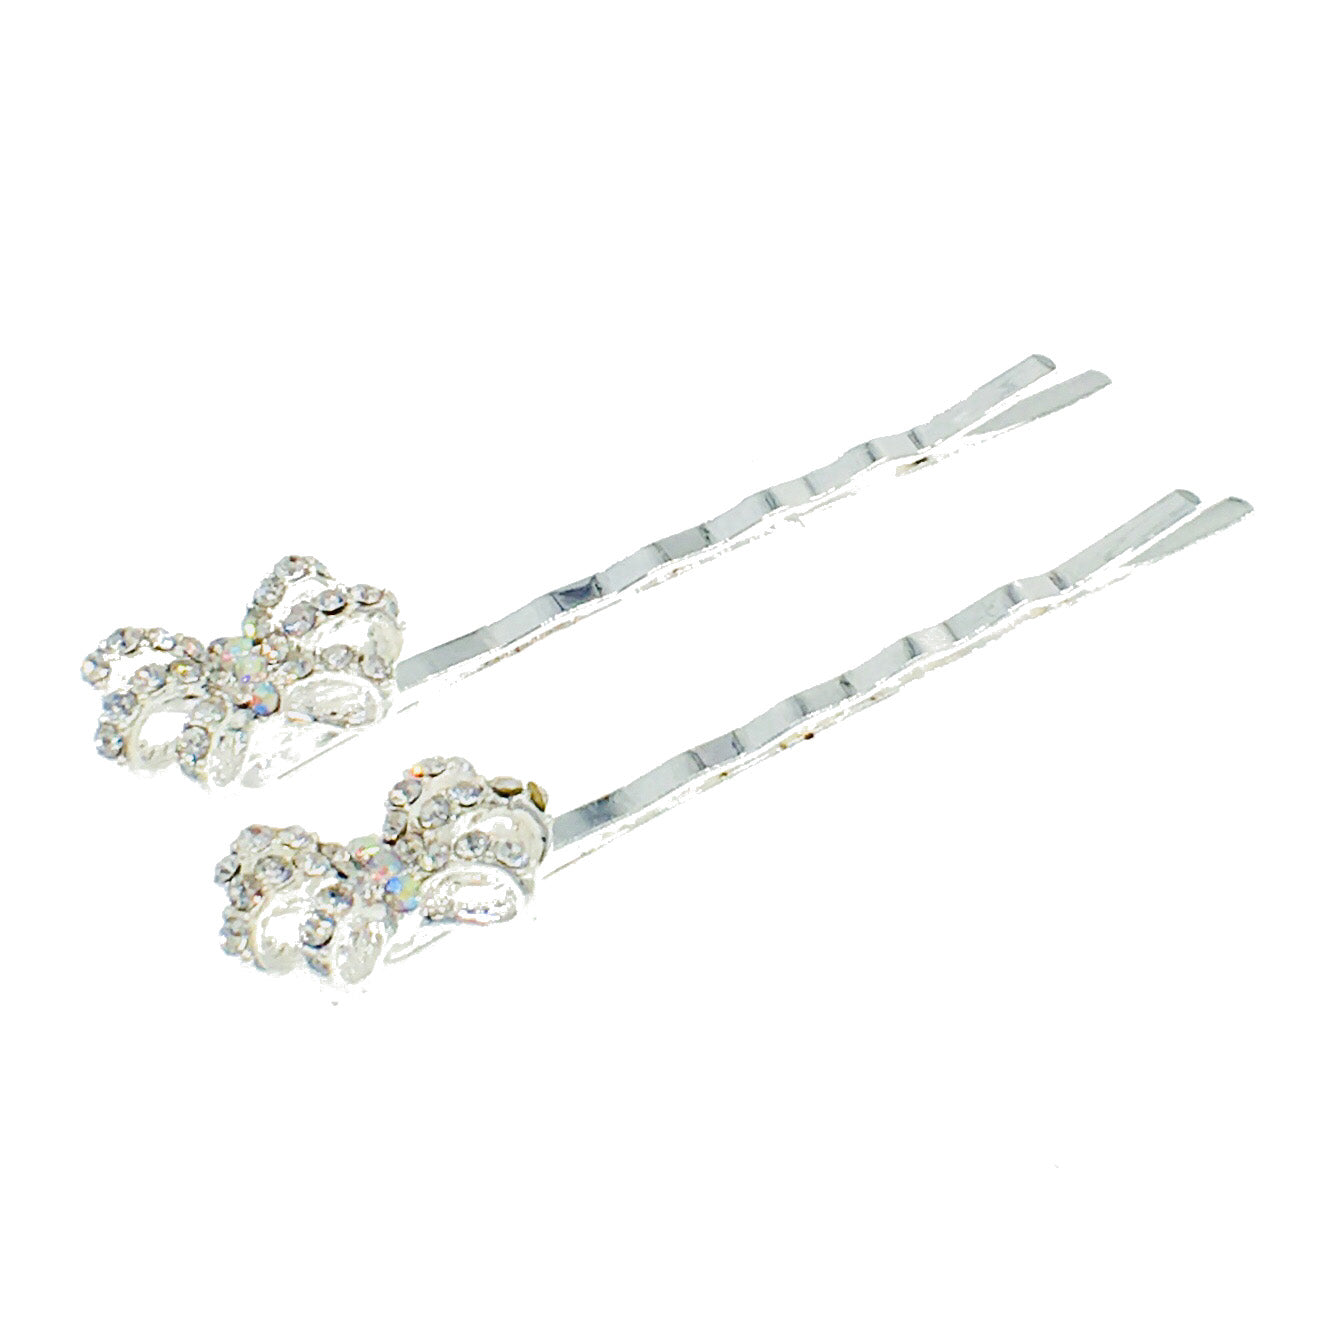 Buttercup Flower Bobby Pin Pair Rhinestone Crystal silver base Clear, Bobby Pin - MOGHANT